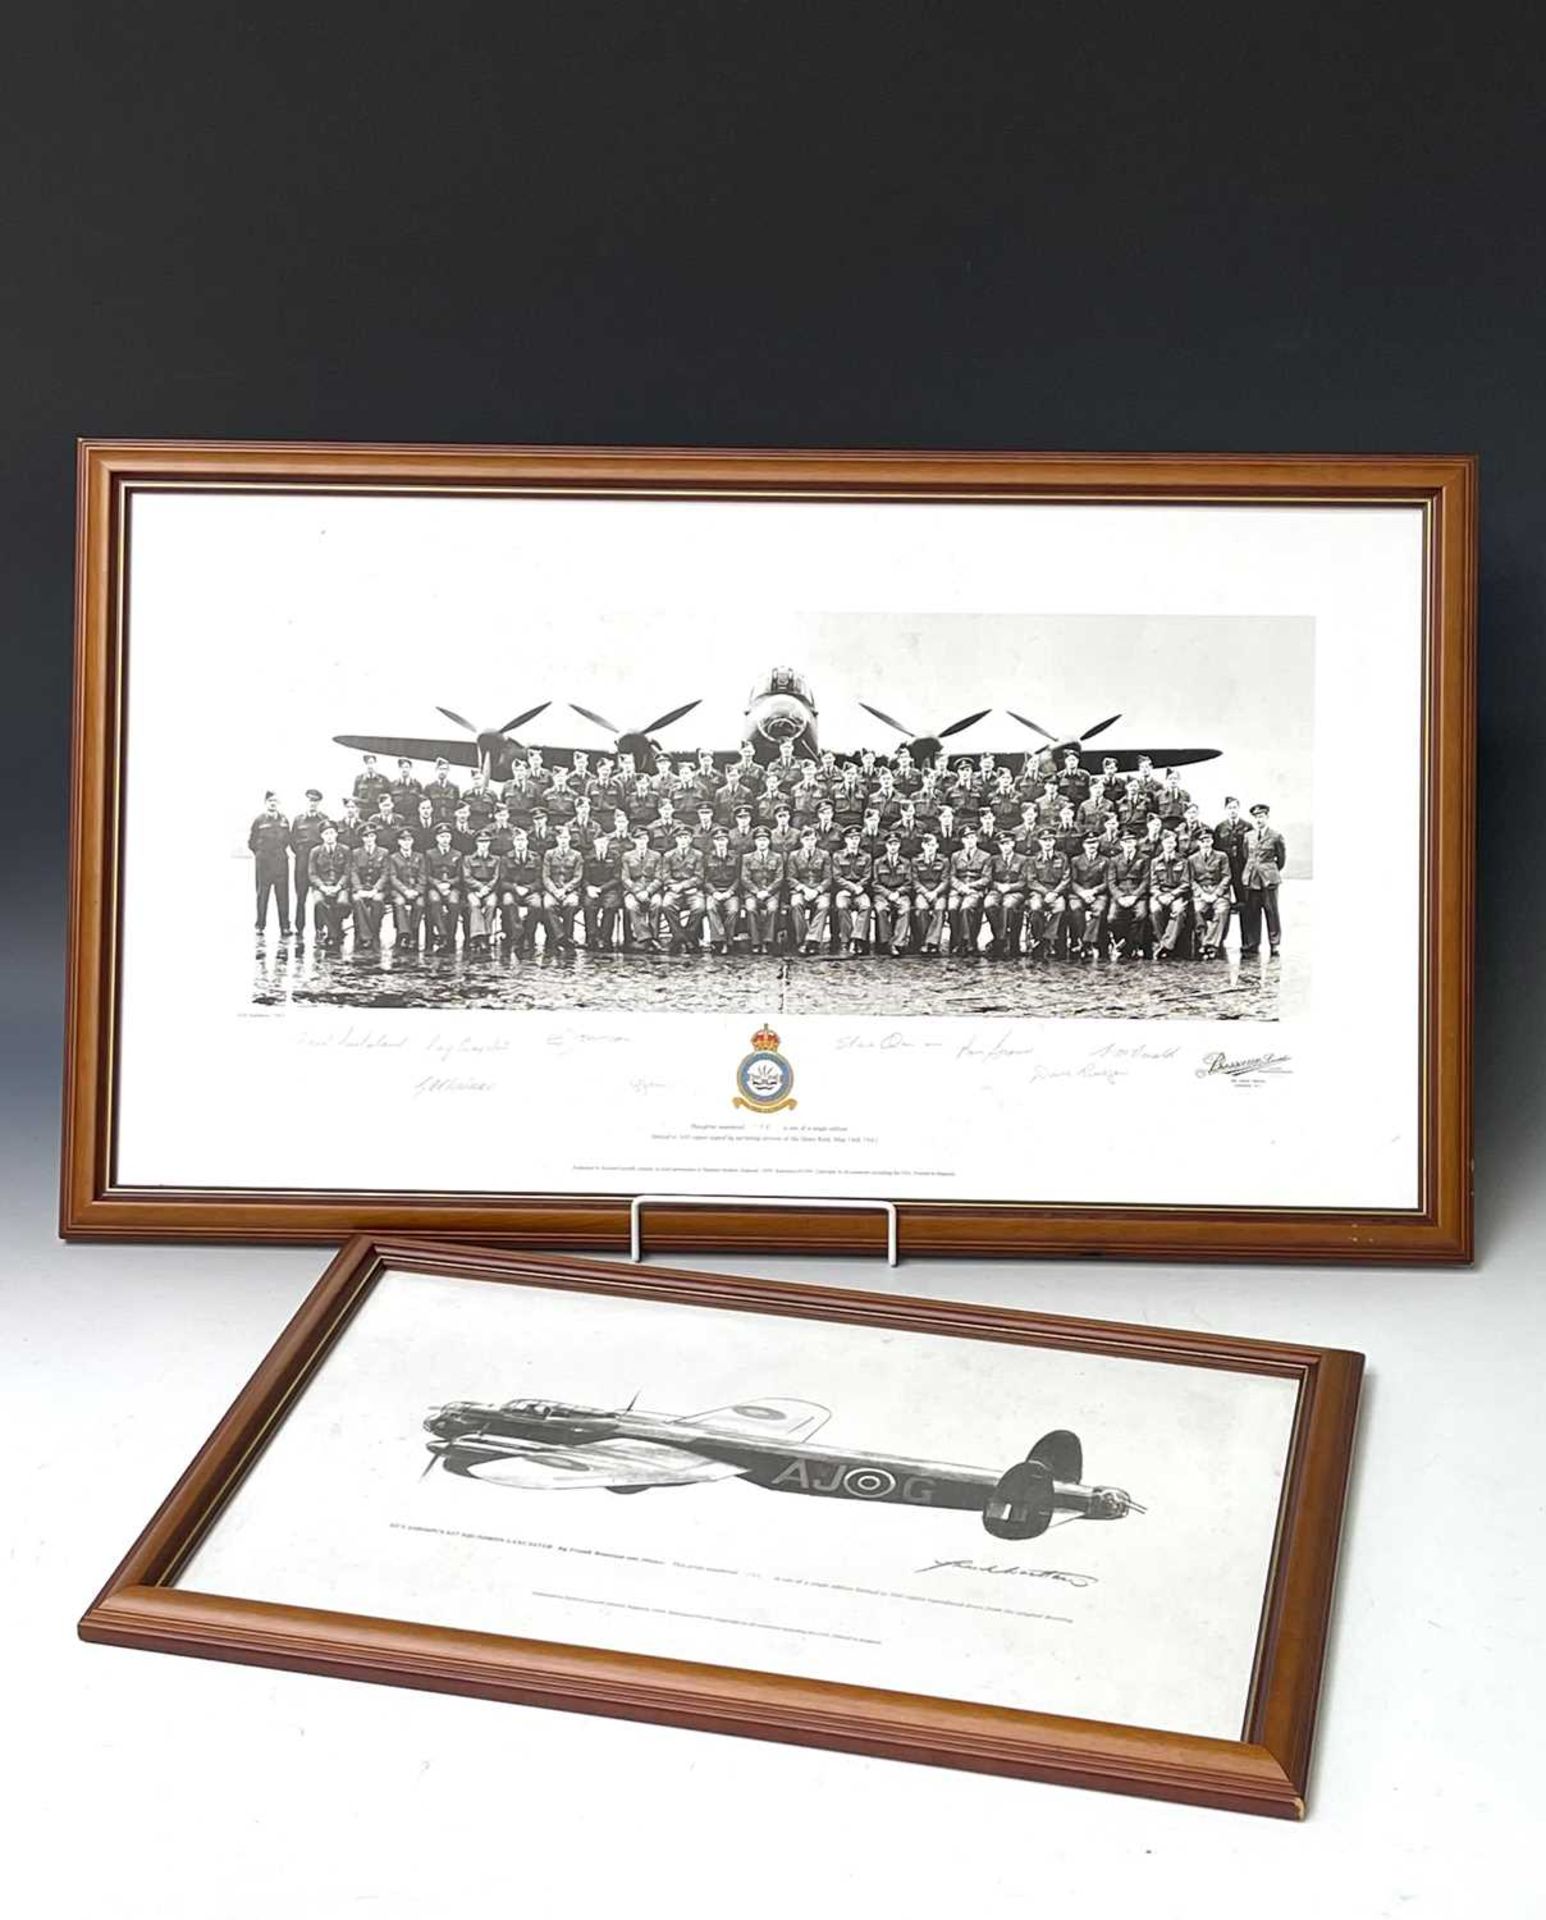 Dam Busters 617 Squadron Second World War Interest. Comprises: 2 framed pictures. Picture 1: A